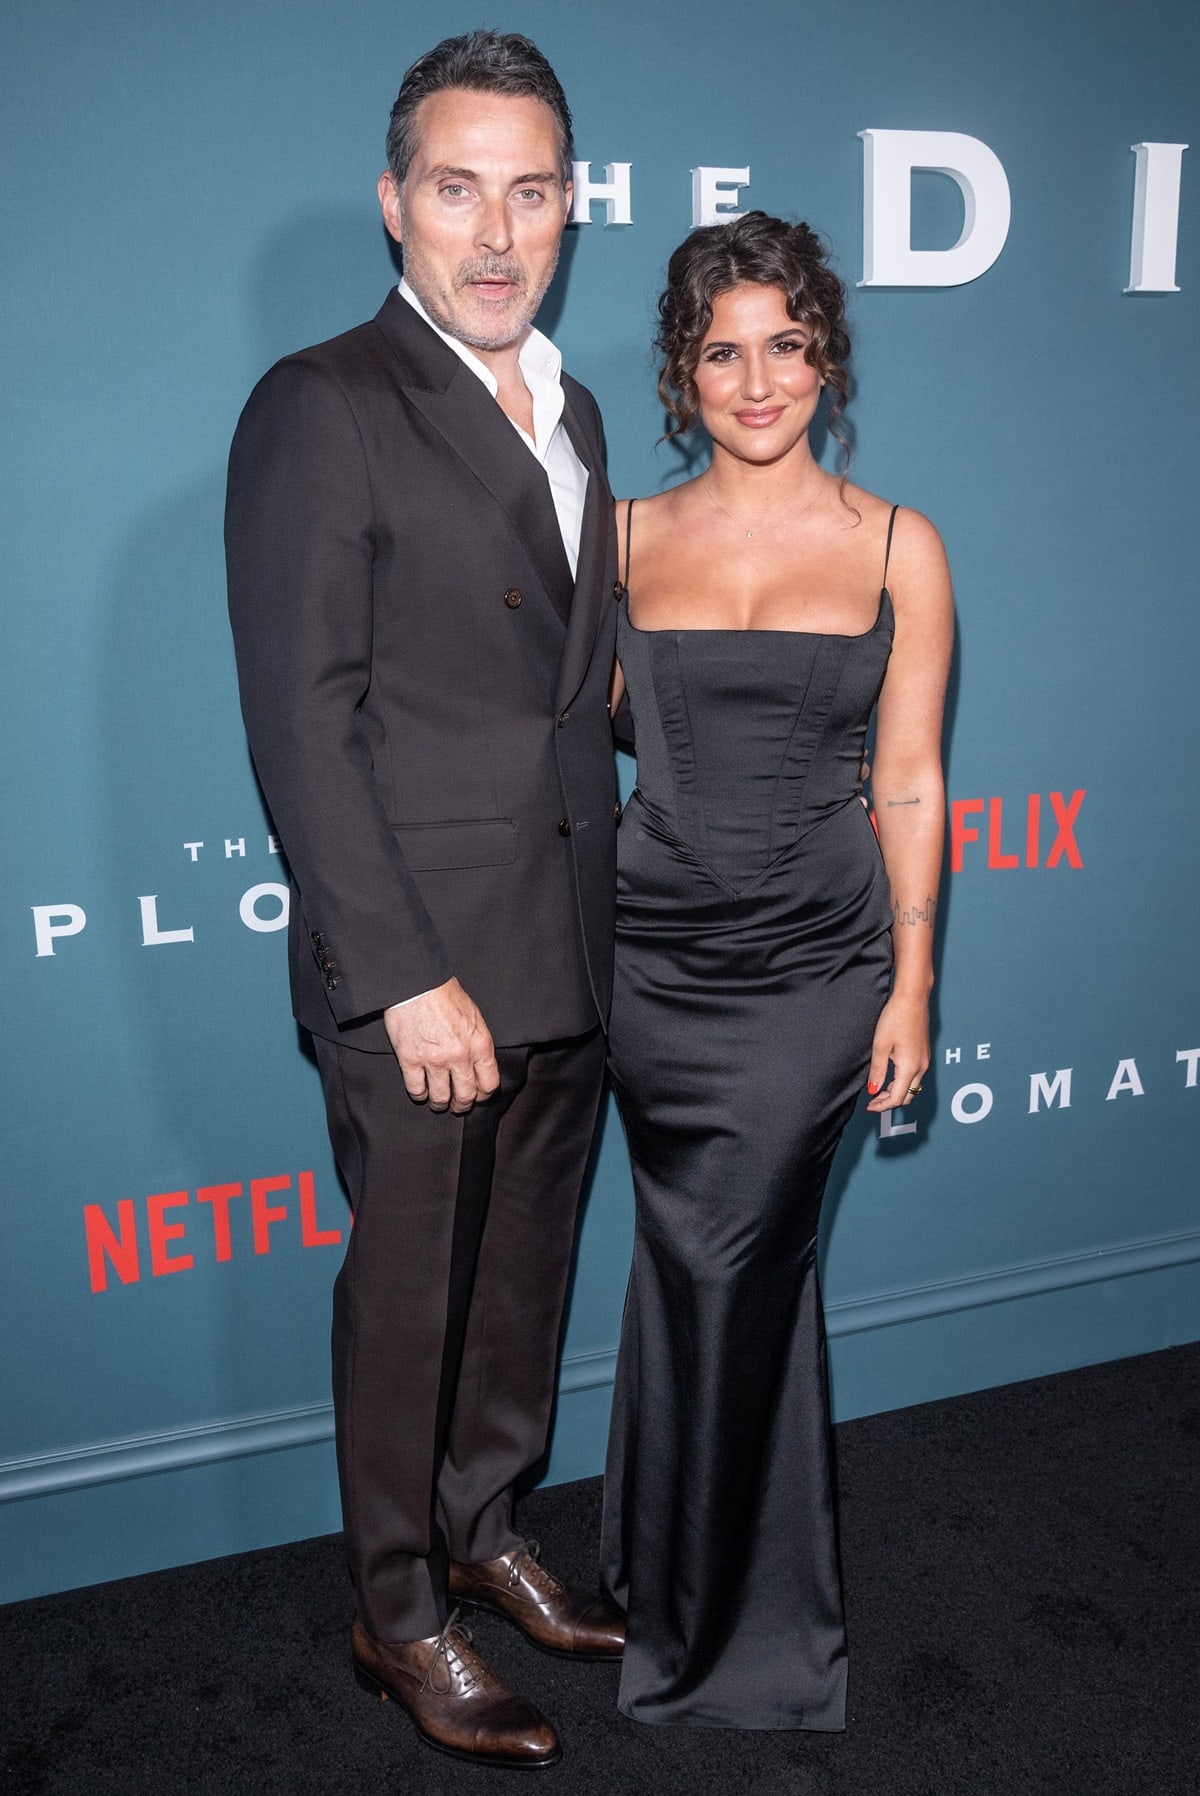 Posing with his girlfriend, Vivian Benitez, Rufus Sewell is an English actor, standing 6 feet (182.9 cm) tall and known for his roles in films like Dark City, The Illusionist, Gods of Egypt, and the TV series The Man in the High Castle